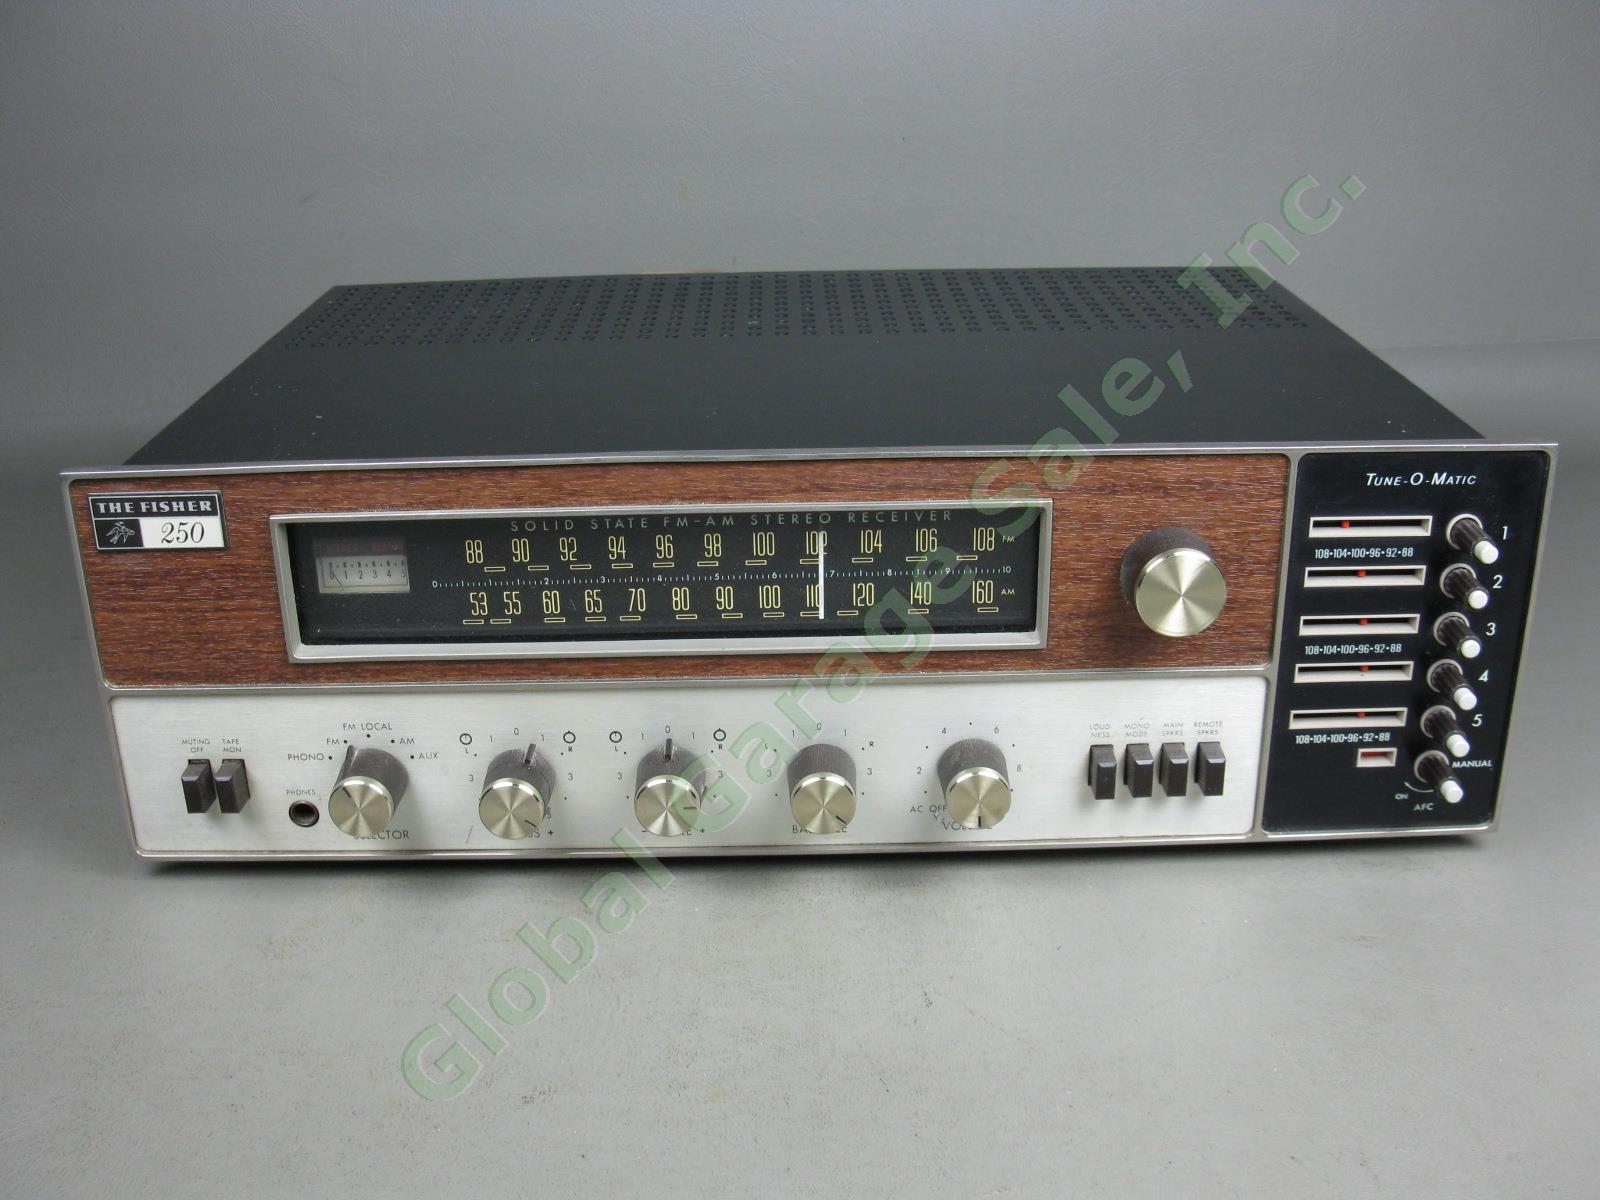 Vtg The Fisher 250-TX Tune-O-Matic AM/FM Stereo Receiver Stations Tested As-Is